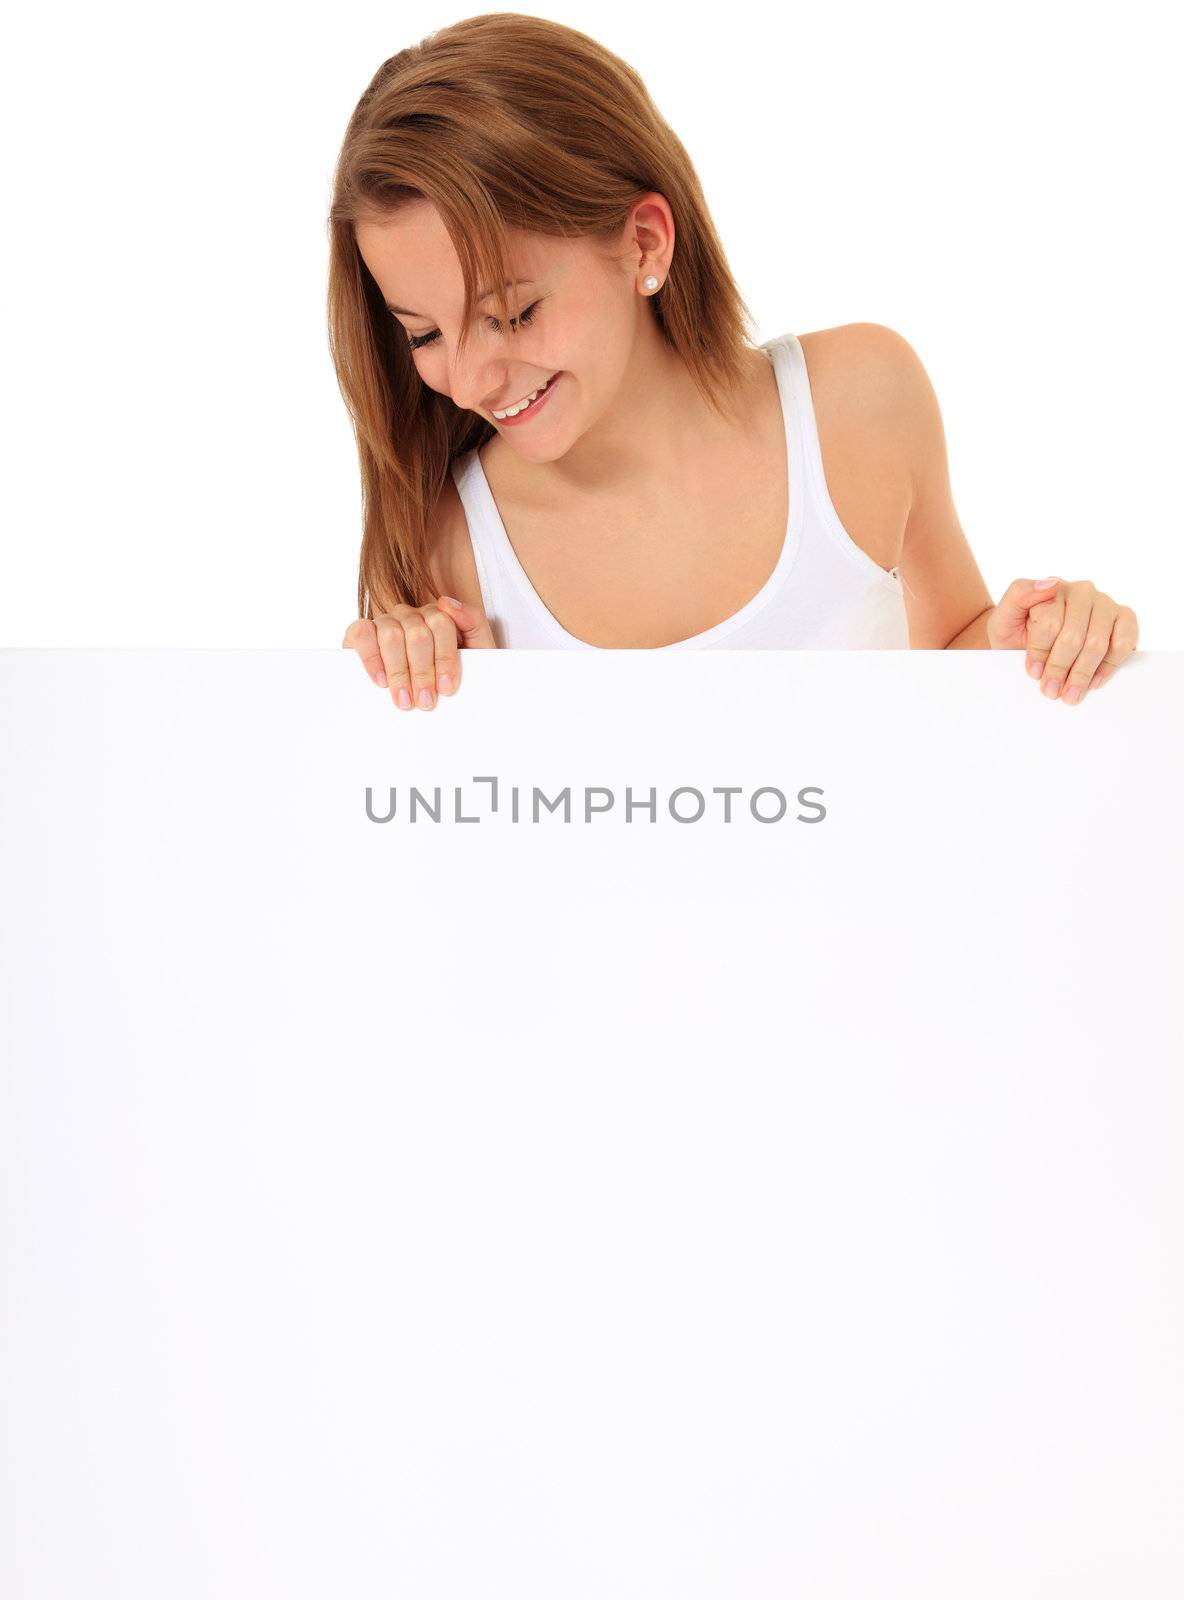 Attractive young woman looking down a blank sign with plenty copy space. All on white background.